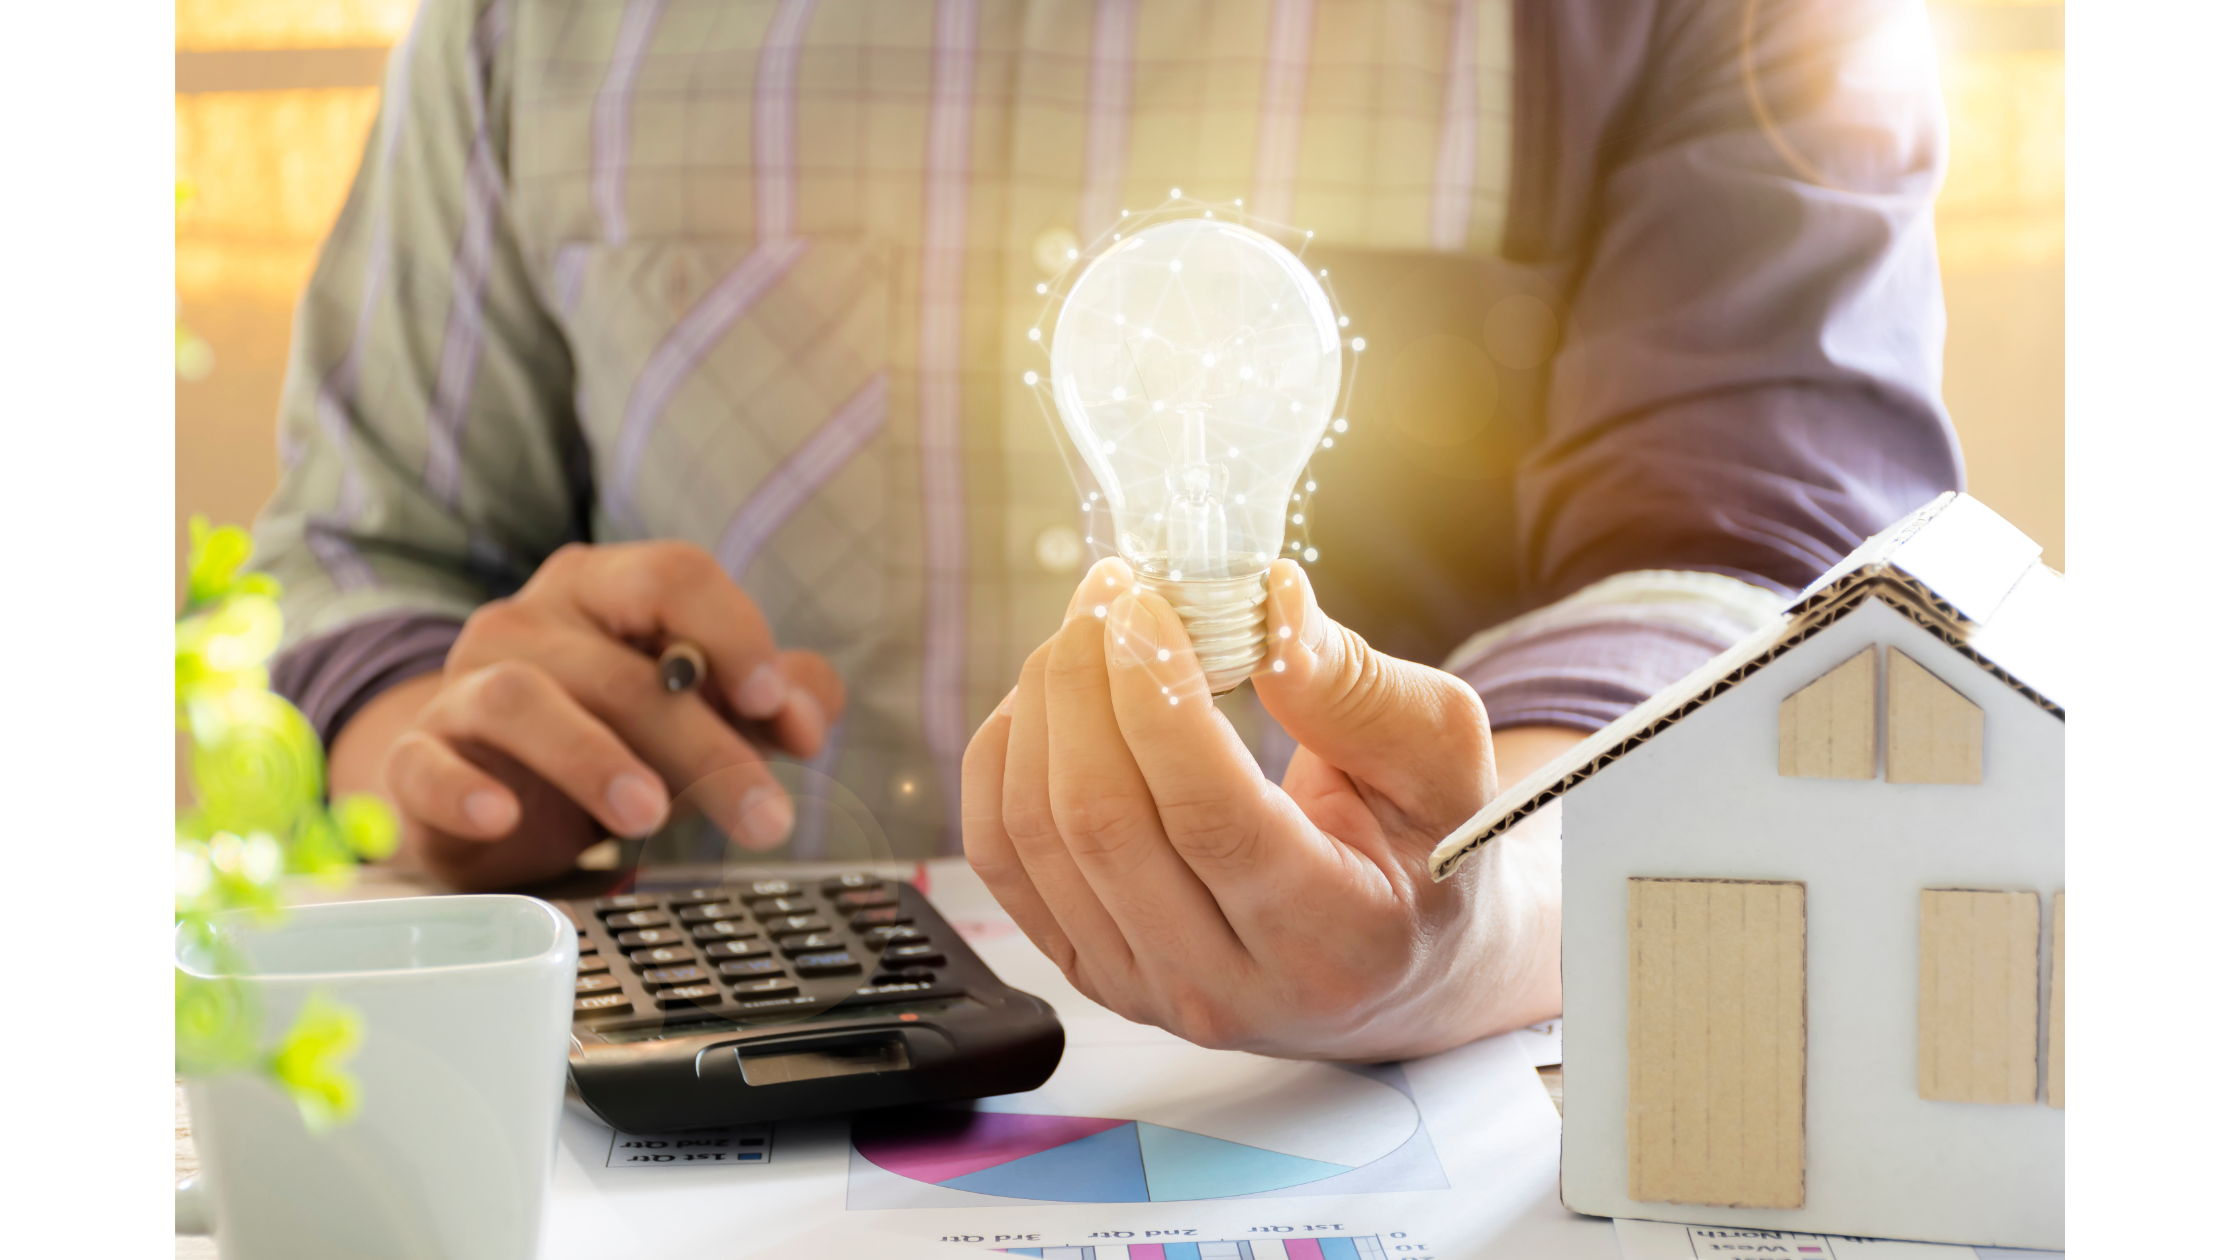 man sitting at desk with light bulb, calculator, and model house